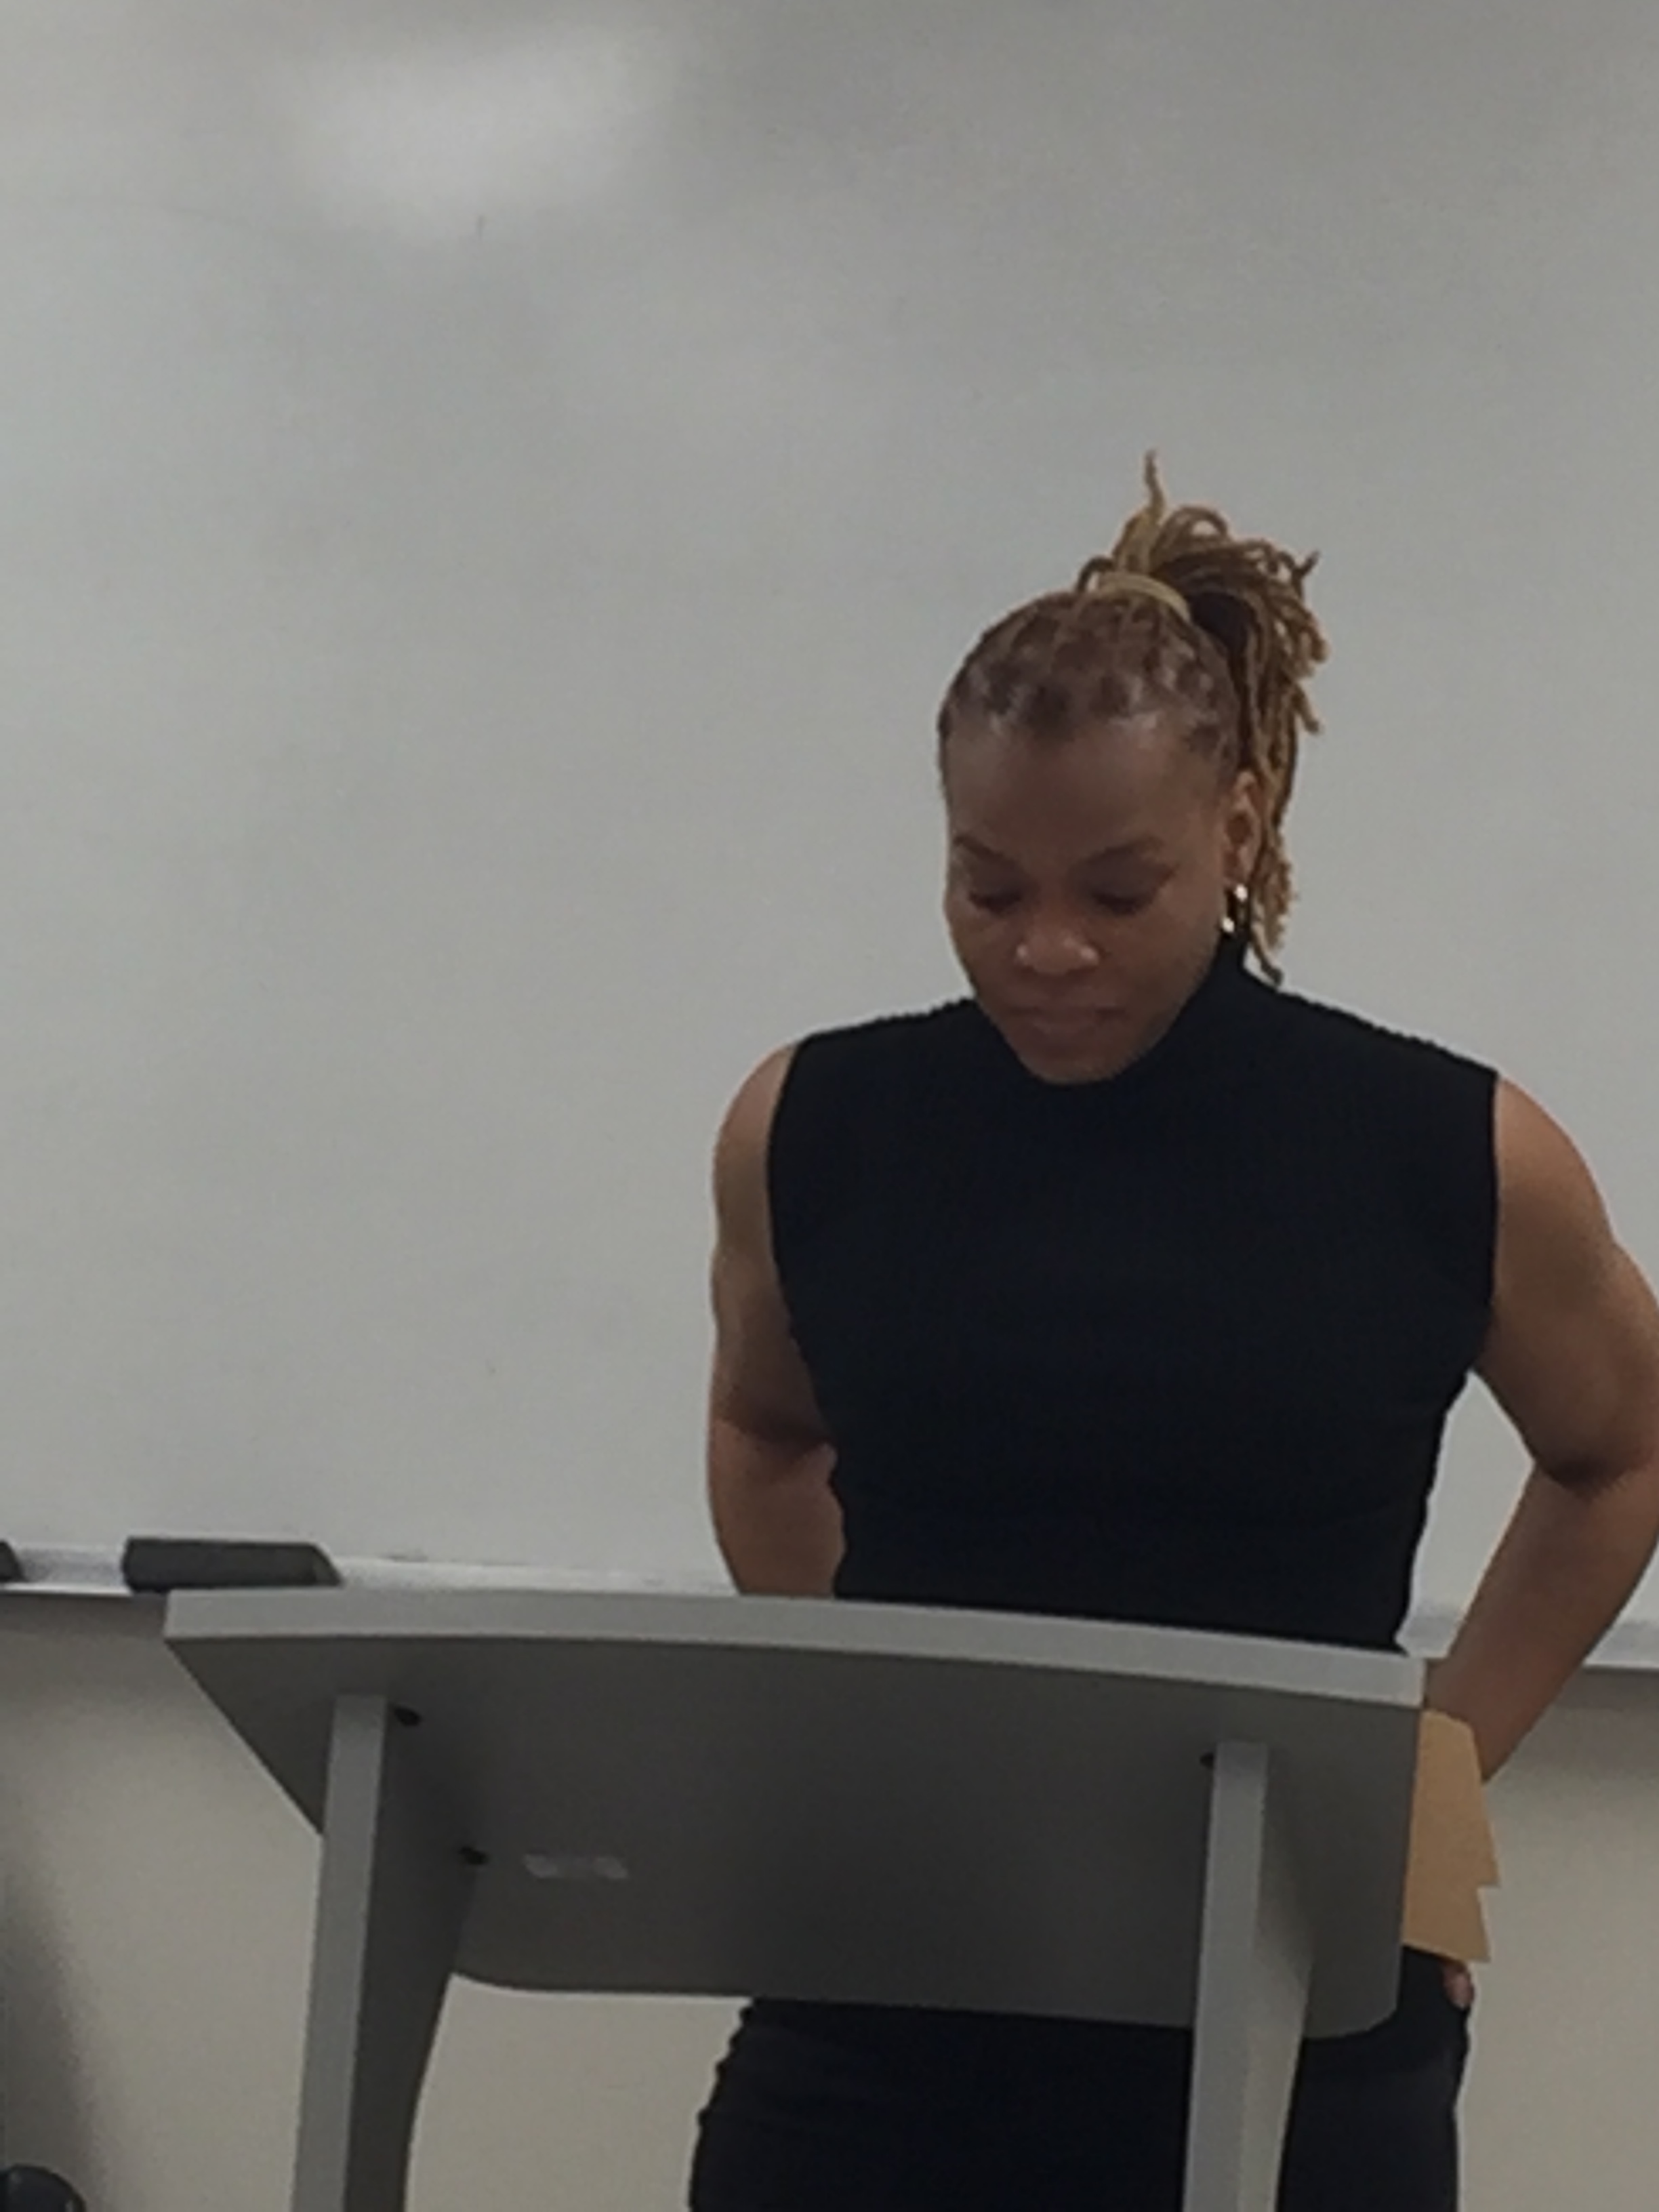  Along with reading from her collections  Attraversiamo  and  Unsteady , she also took a moment to recite a few lines from her two favorite poems: “For Each of You” by Audre Lorde and “Ego Tripping” by Nikki Giovanni. 